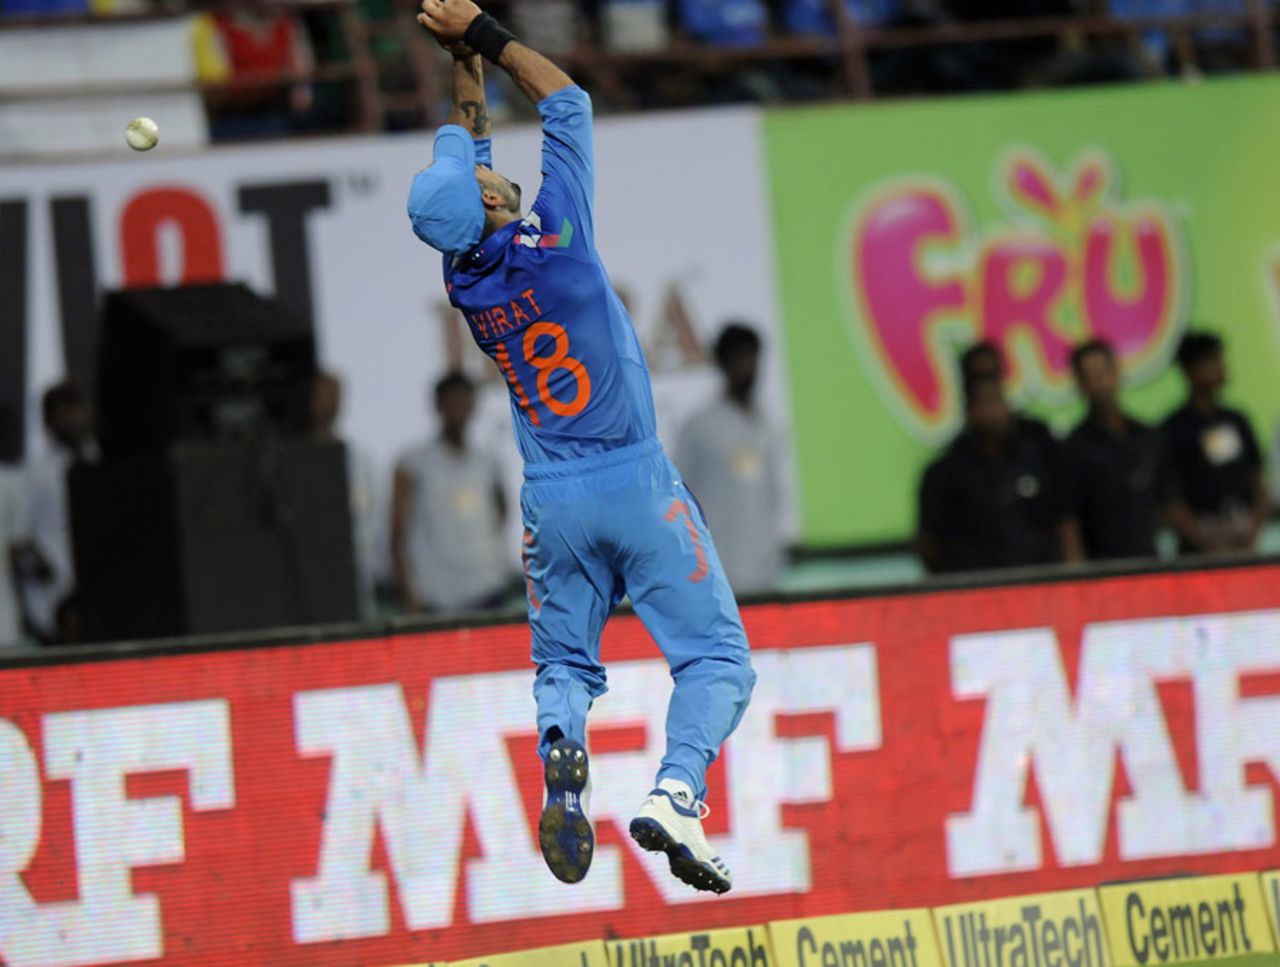 Virat Kohli could not hold on to a chance near the boundary, India v West Indies, 1st ODI, Kochi, October 8, 2014